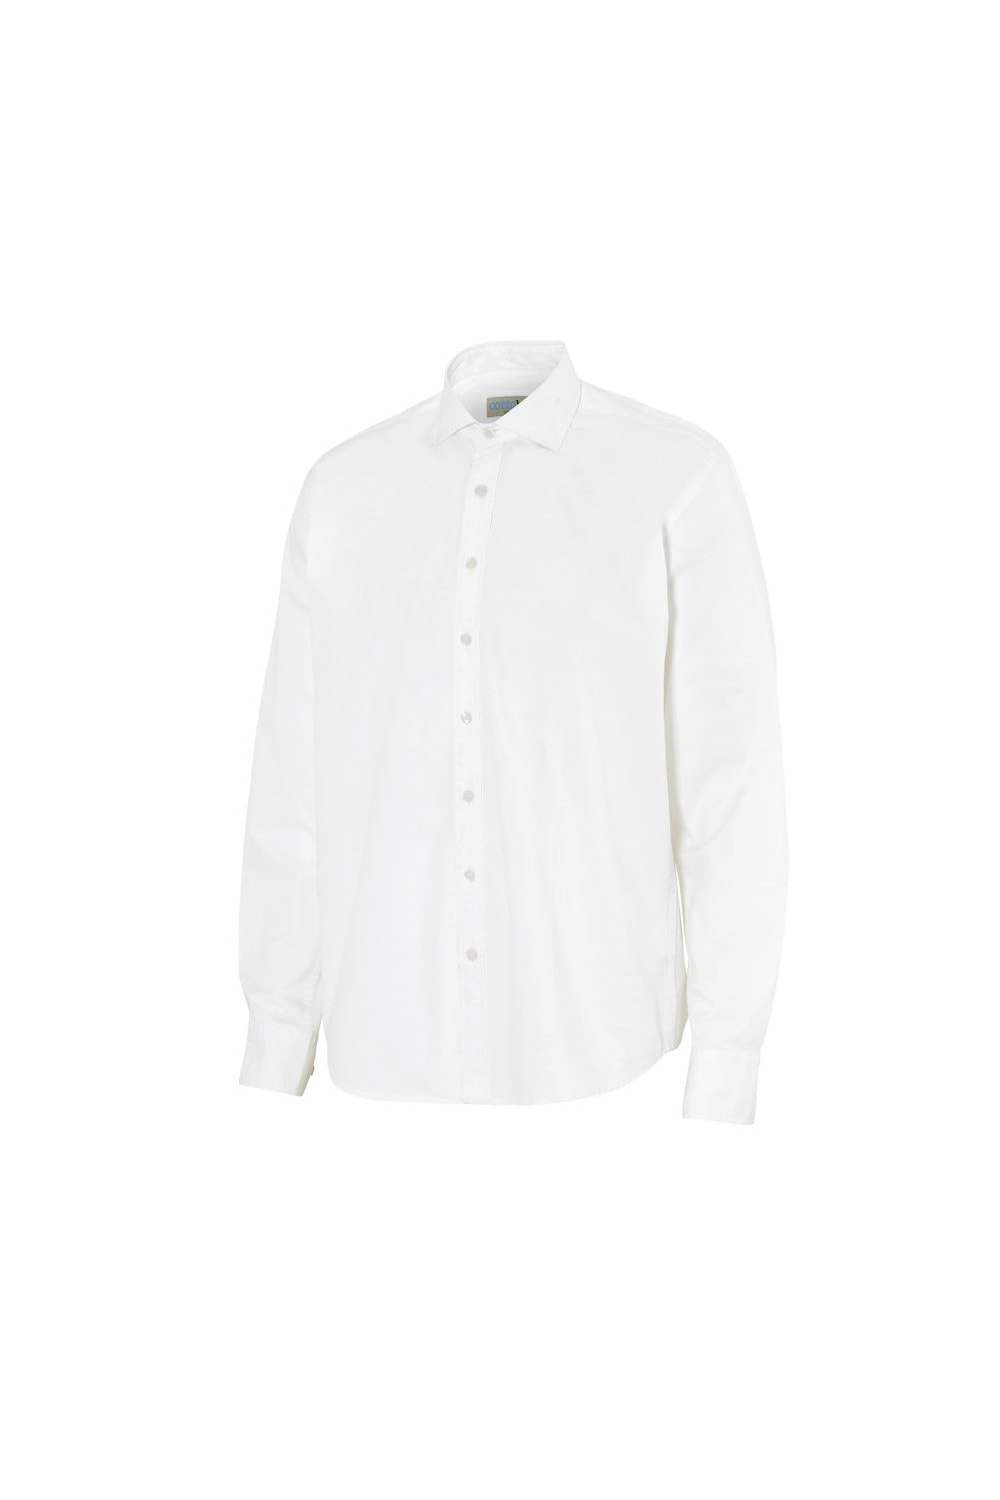 Cottover Mens Twill Formal Shirt (White)